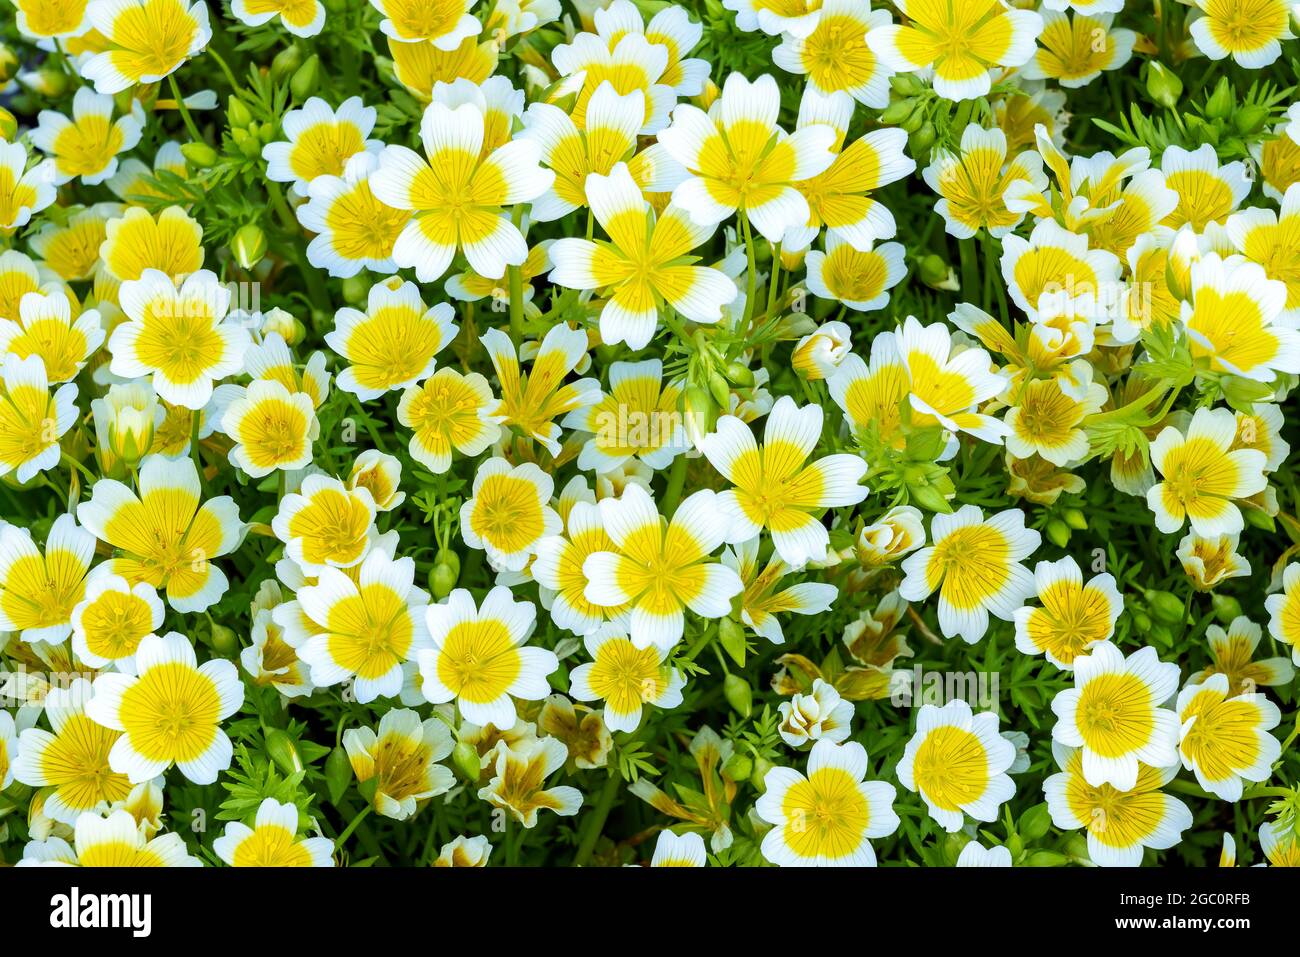 Poached egg plant, (Limnanthes douglasii)  a common annual garden flower plant growing throughout spring summer and autumn, stock photo image Stock Photo